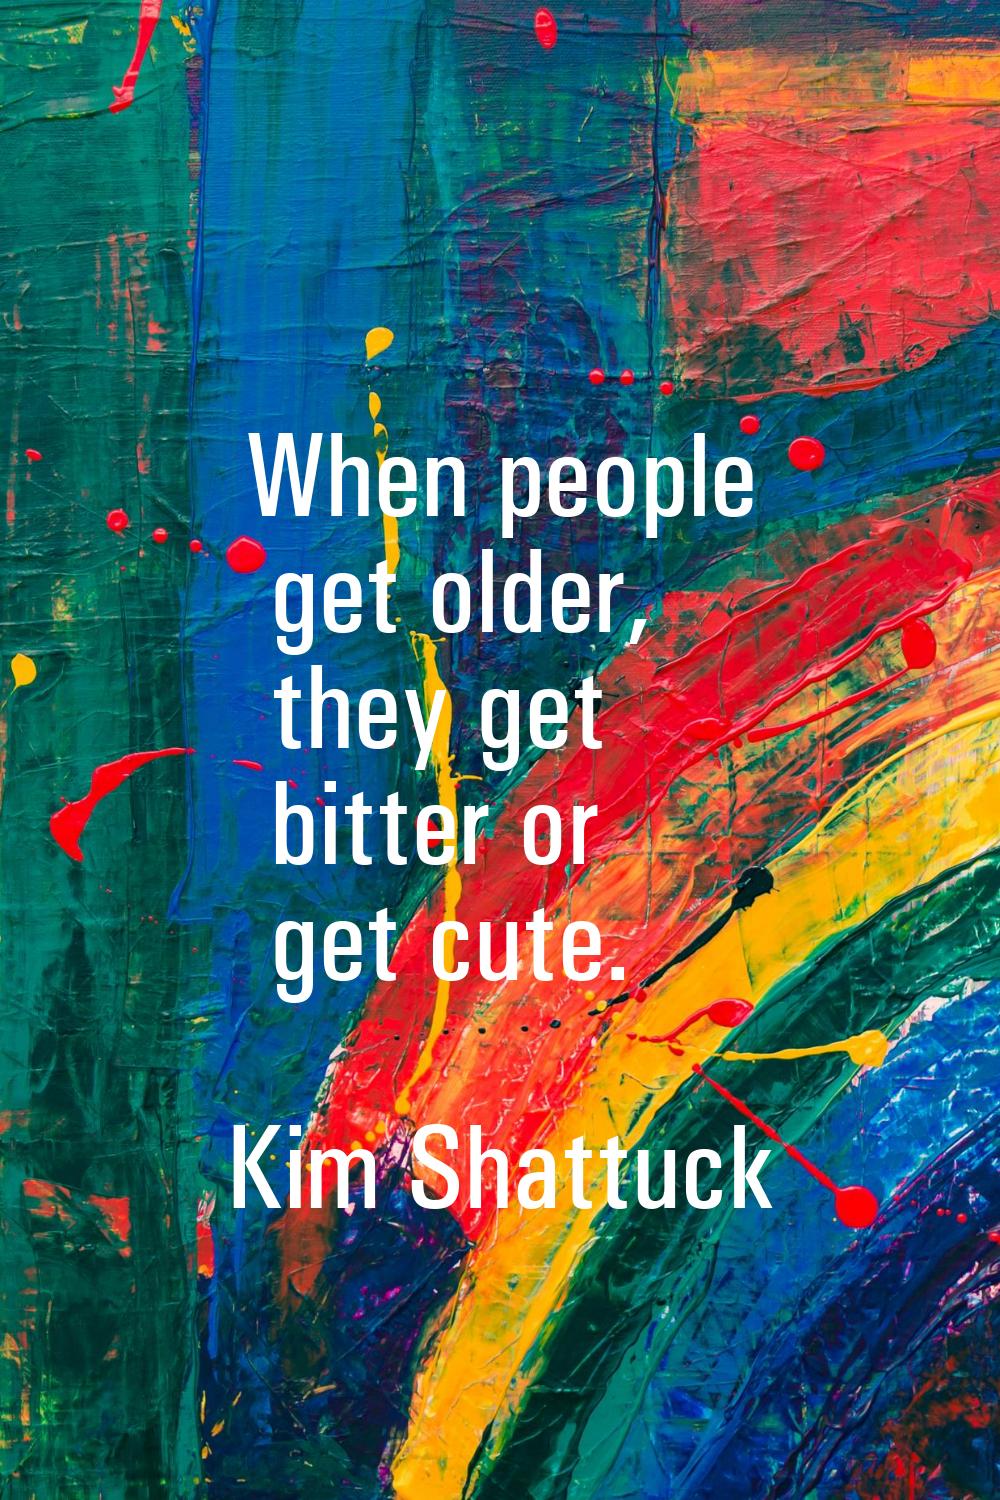 When people get older, they get bitter or get cute.